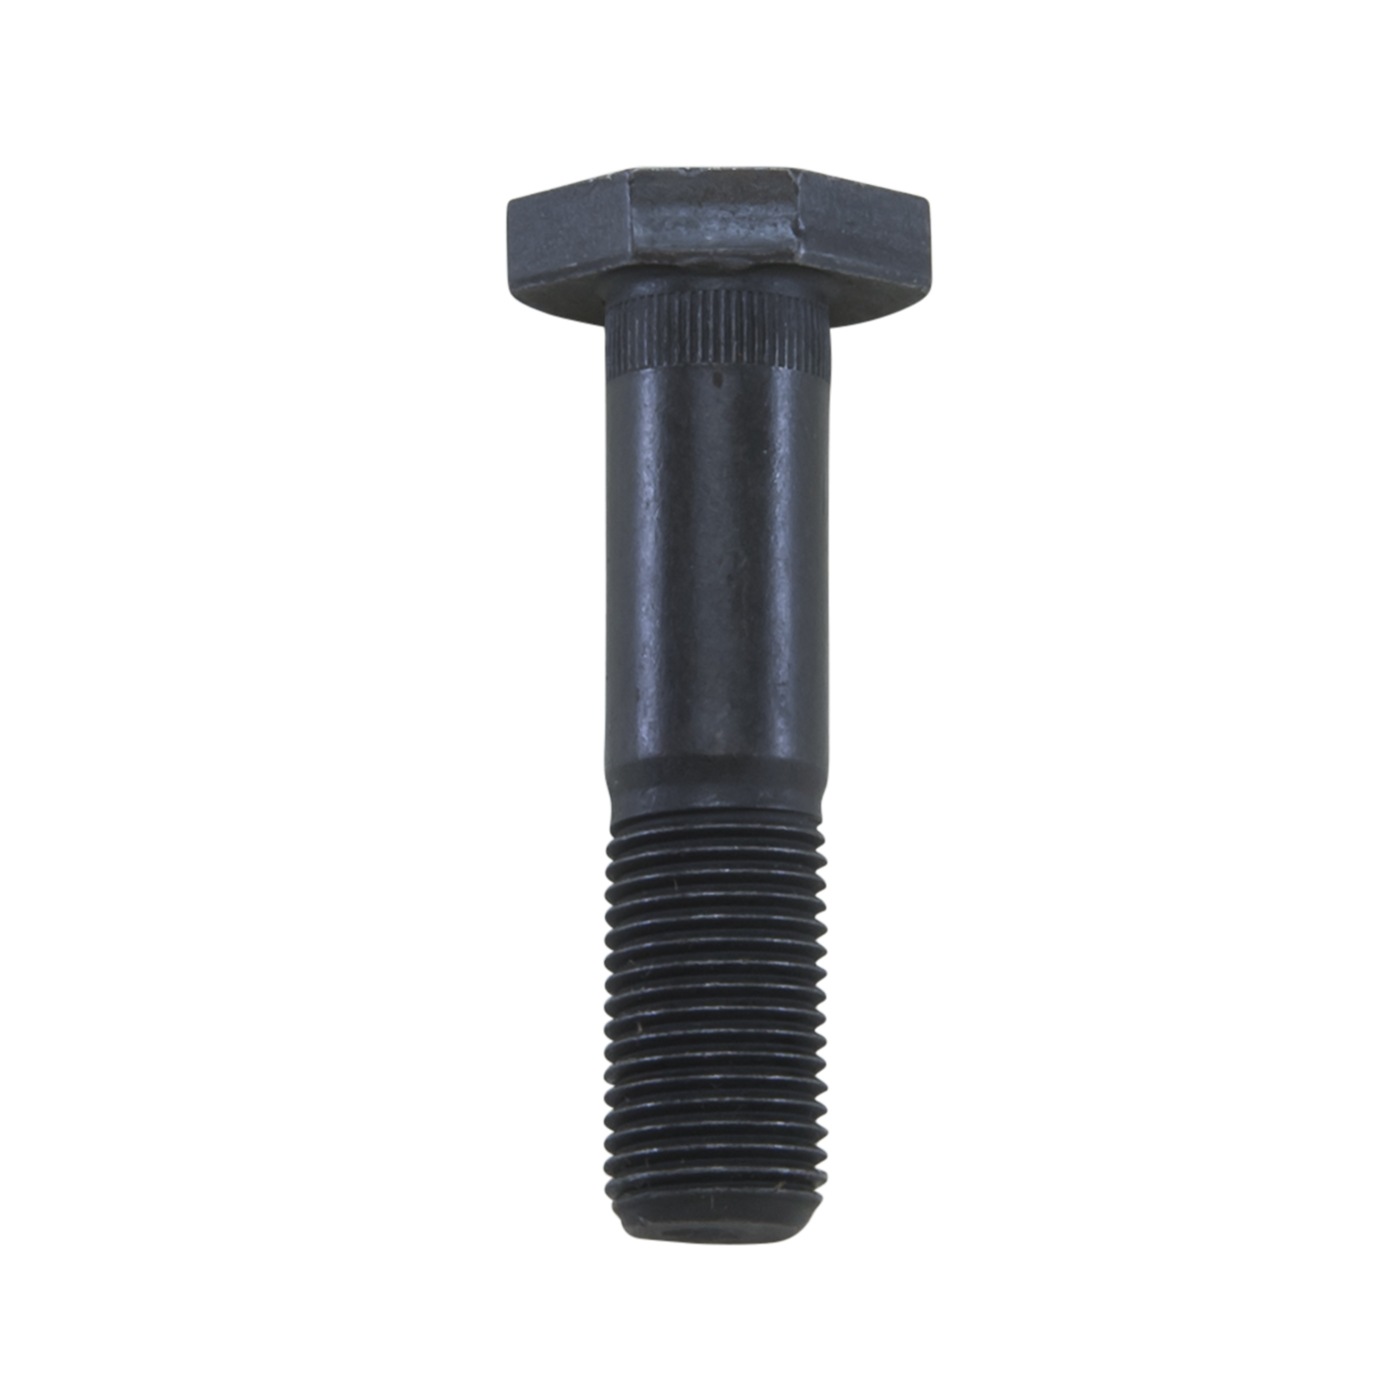 Replacement steering knuckle stud for Dana 60, '79-'91 GM 